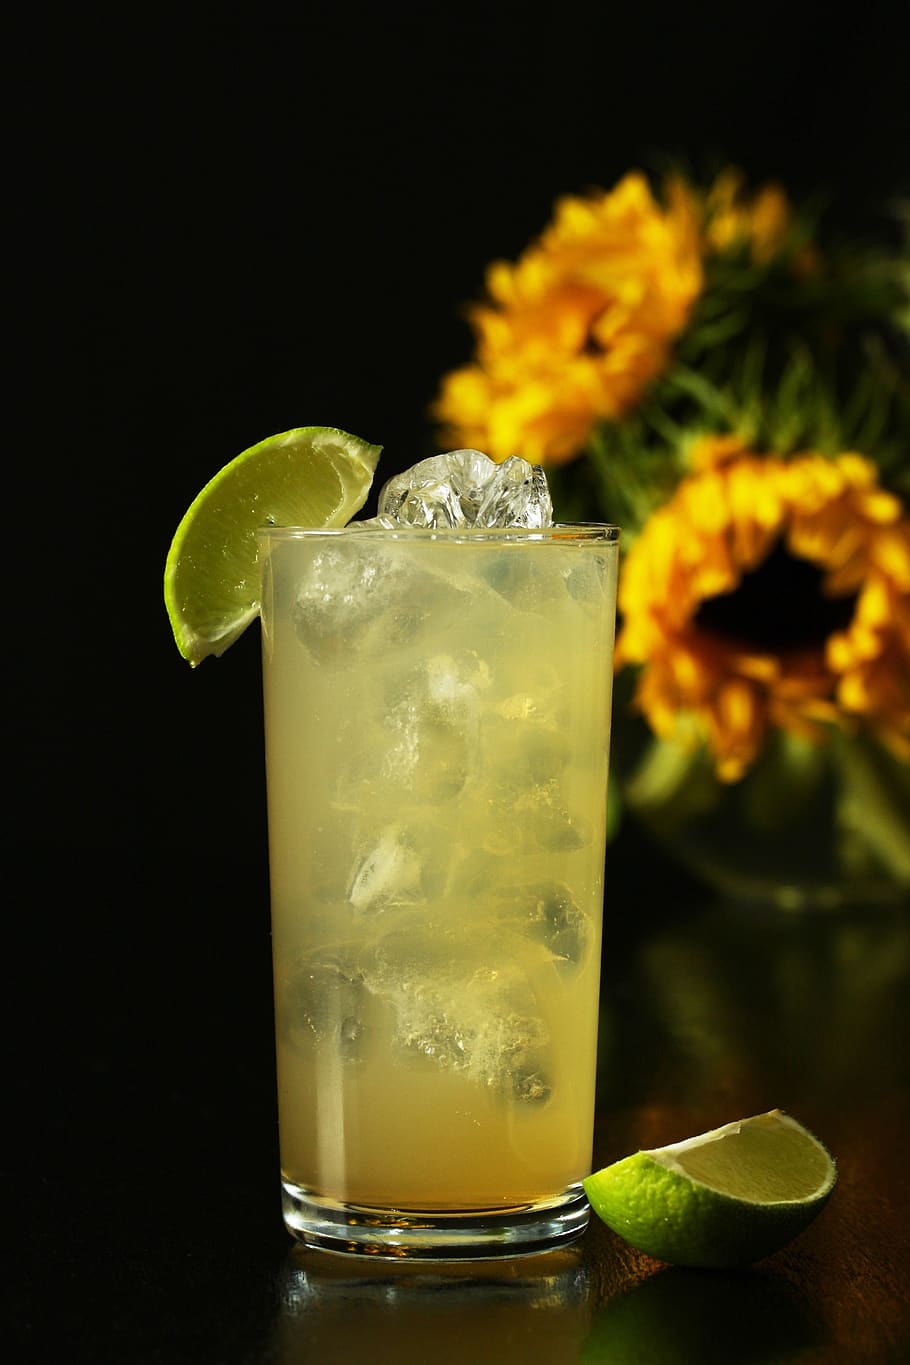 gin and ginger ale, cocktail, ginger ale, mocktail, sunflowers, lime, cocktails, mocktails, party, ice